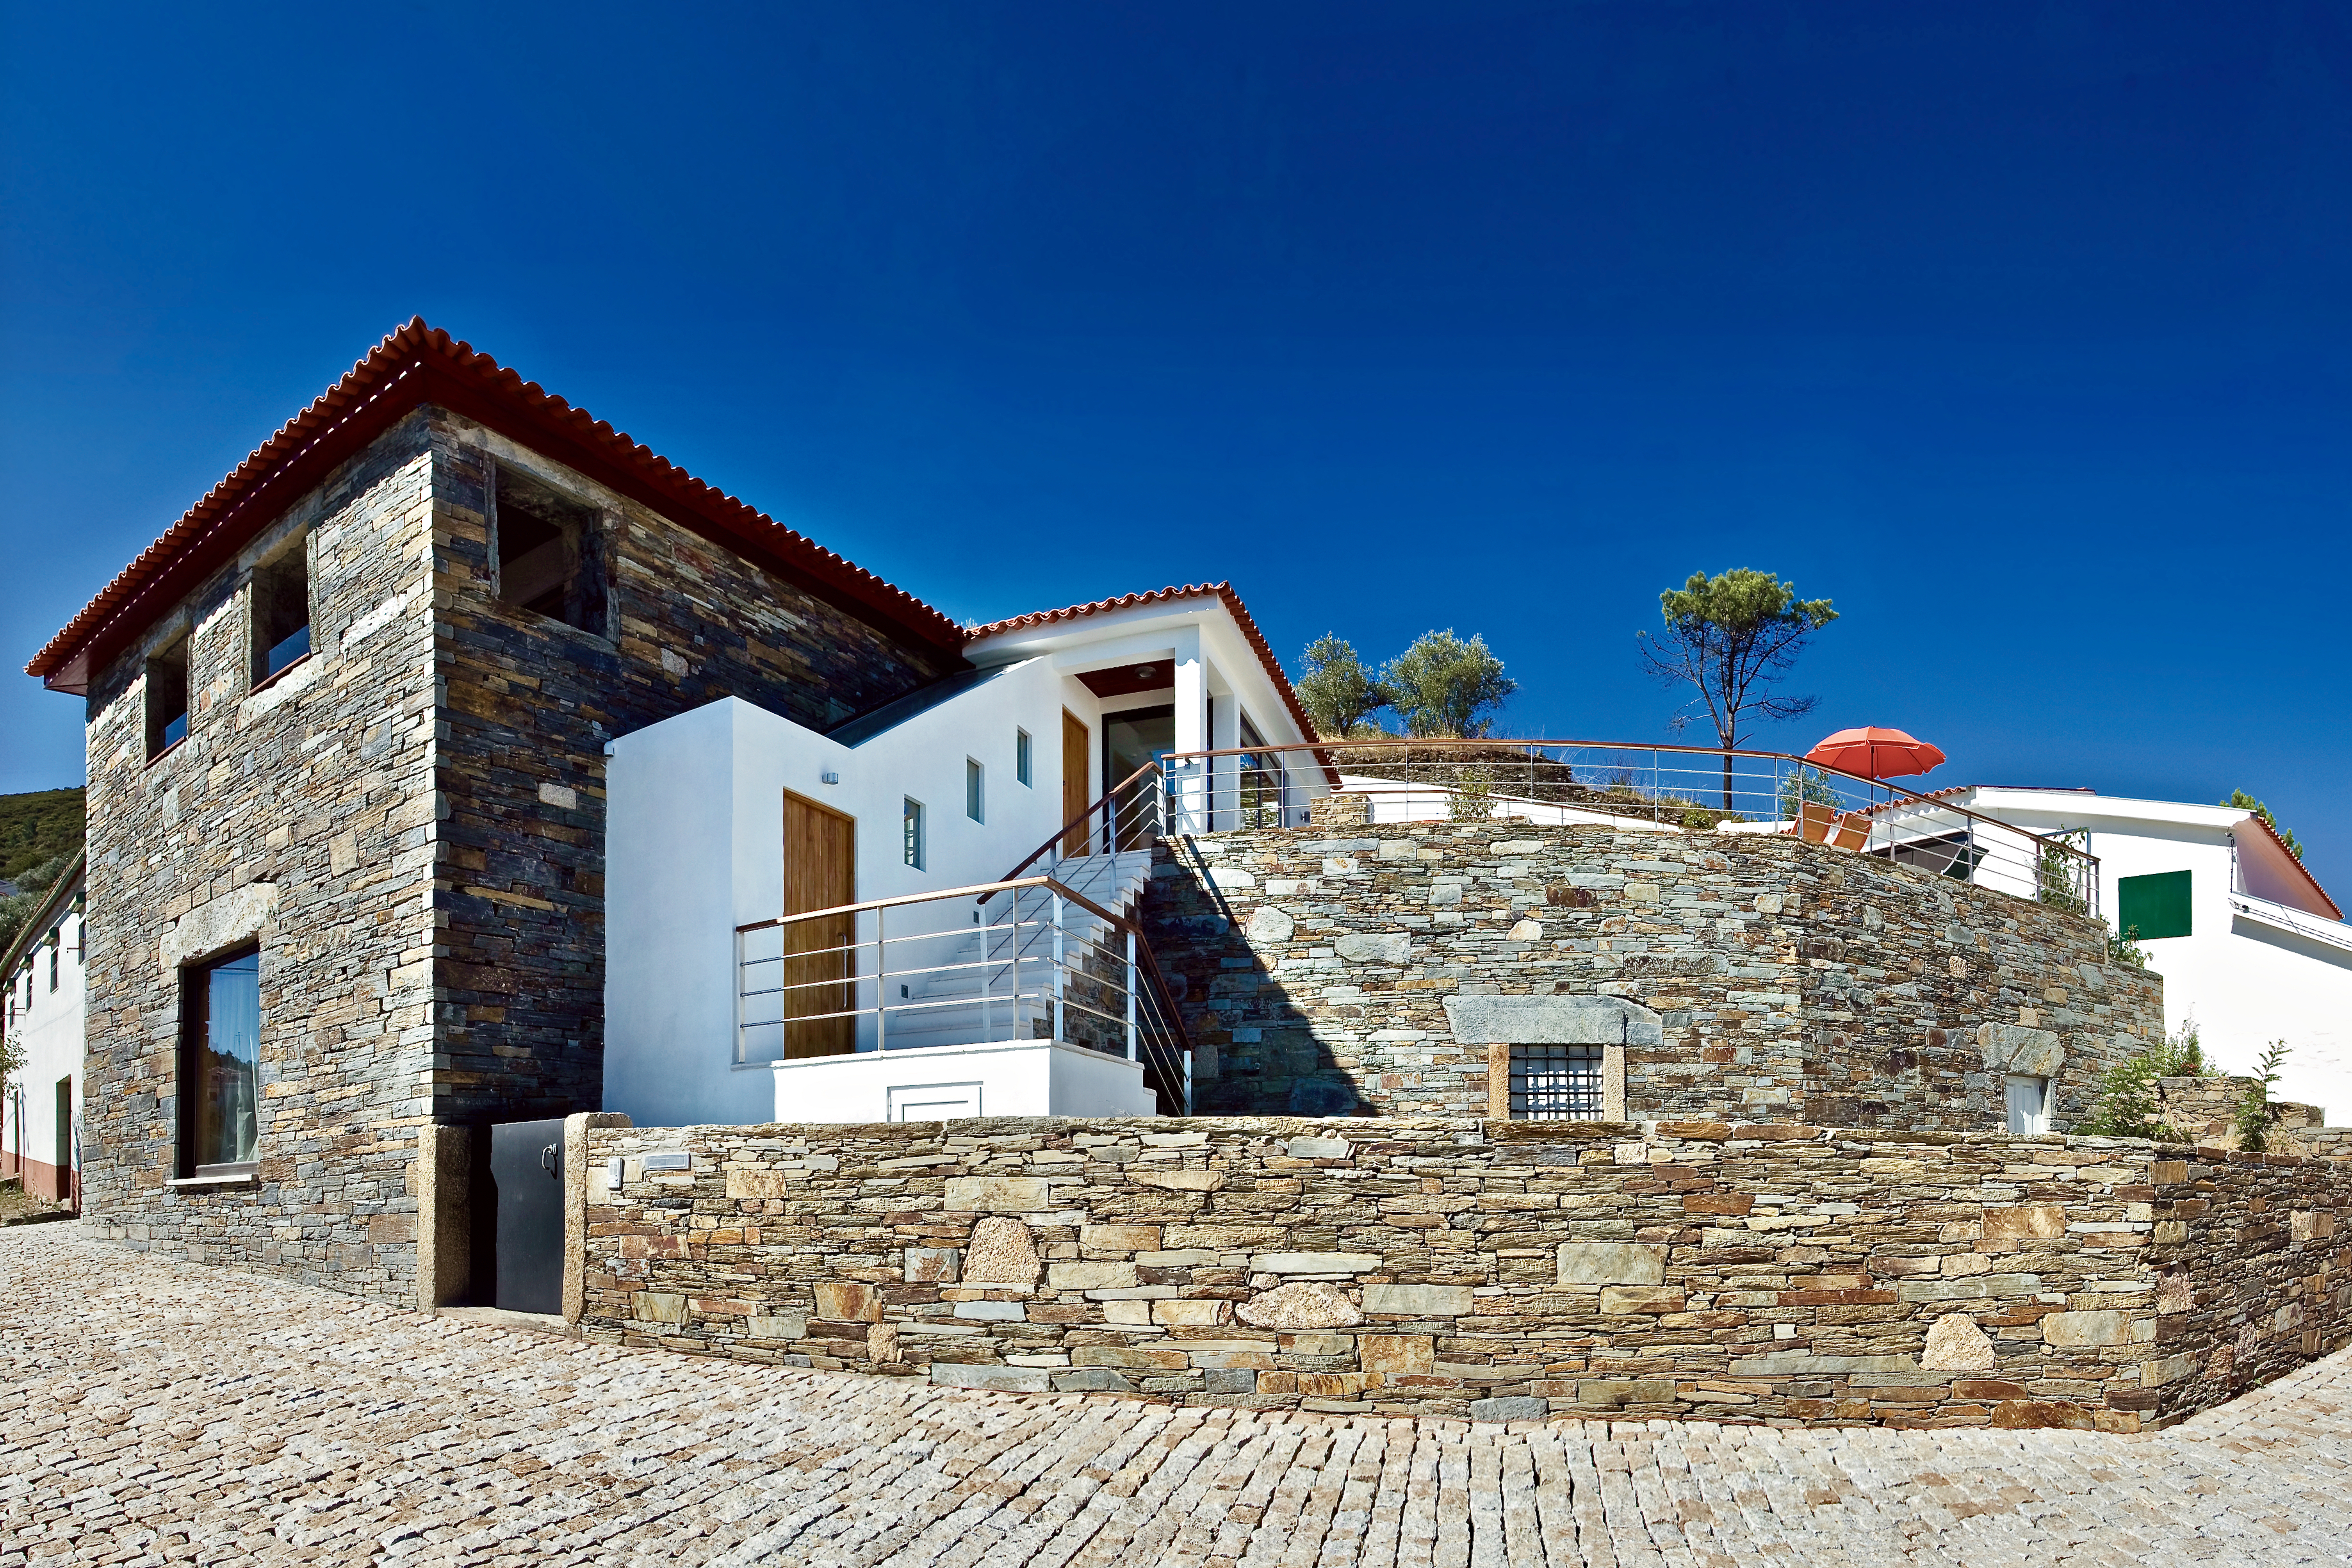 3 Bedroom Luxury Villa With pool and Douro Valley Scenery Views